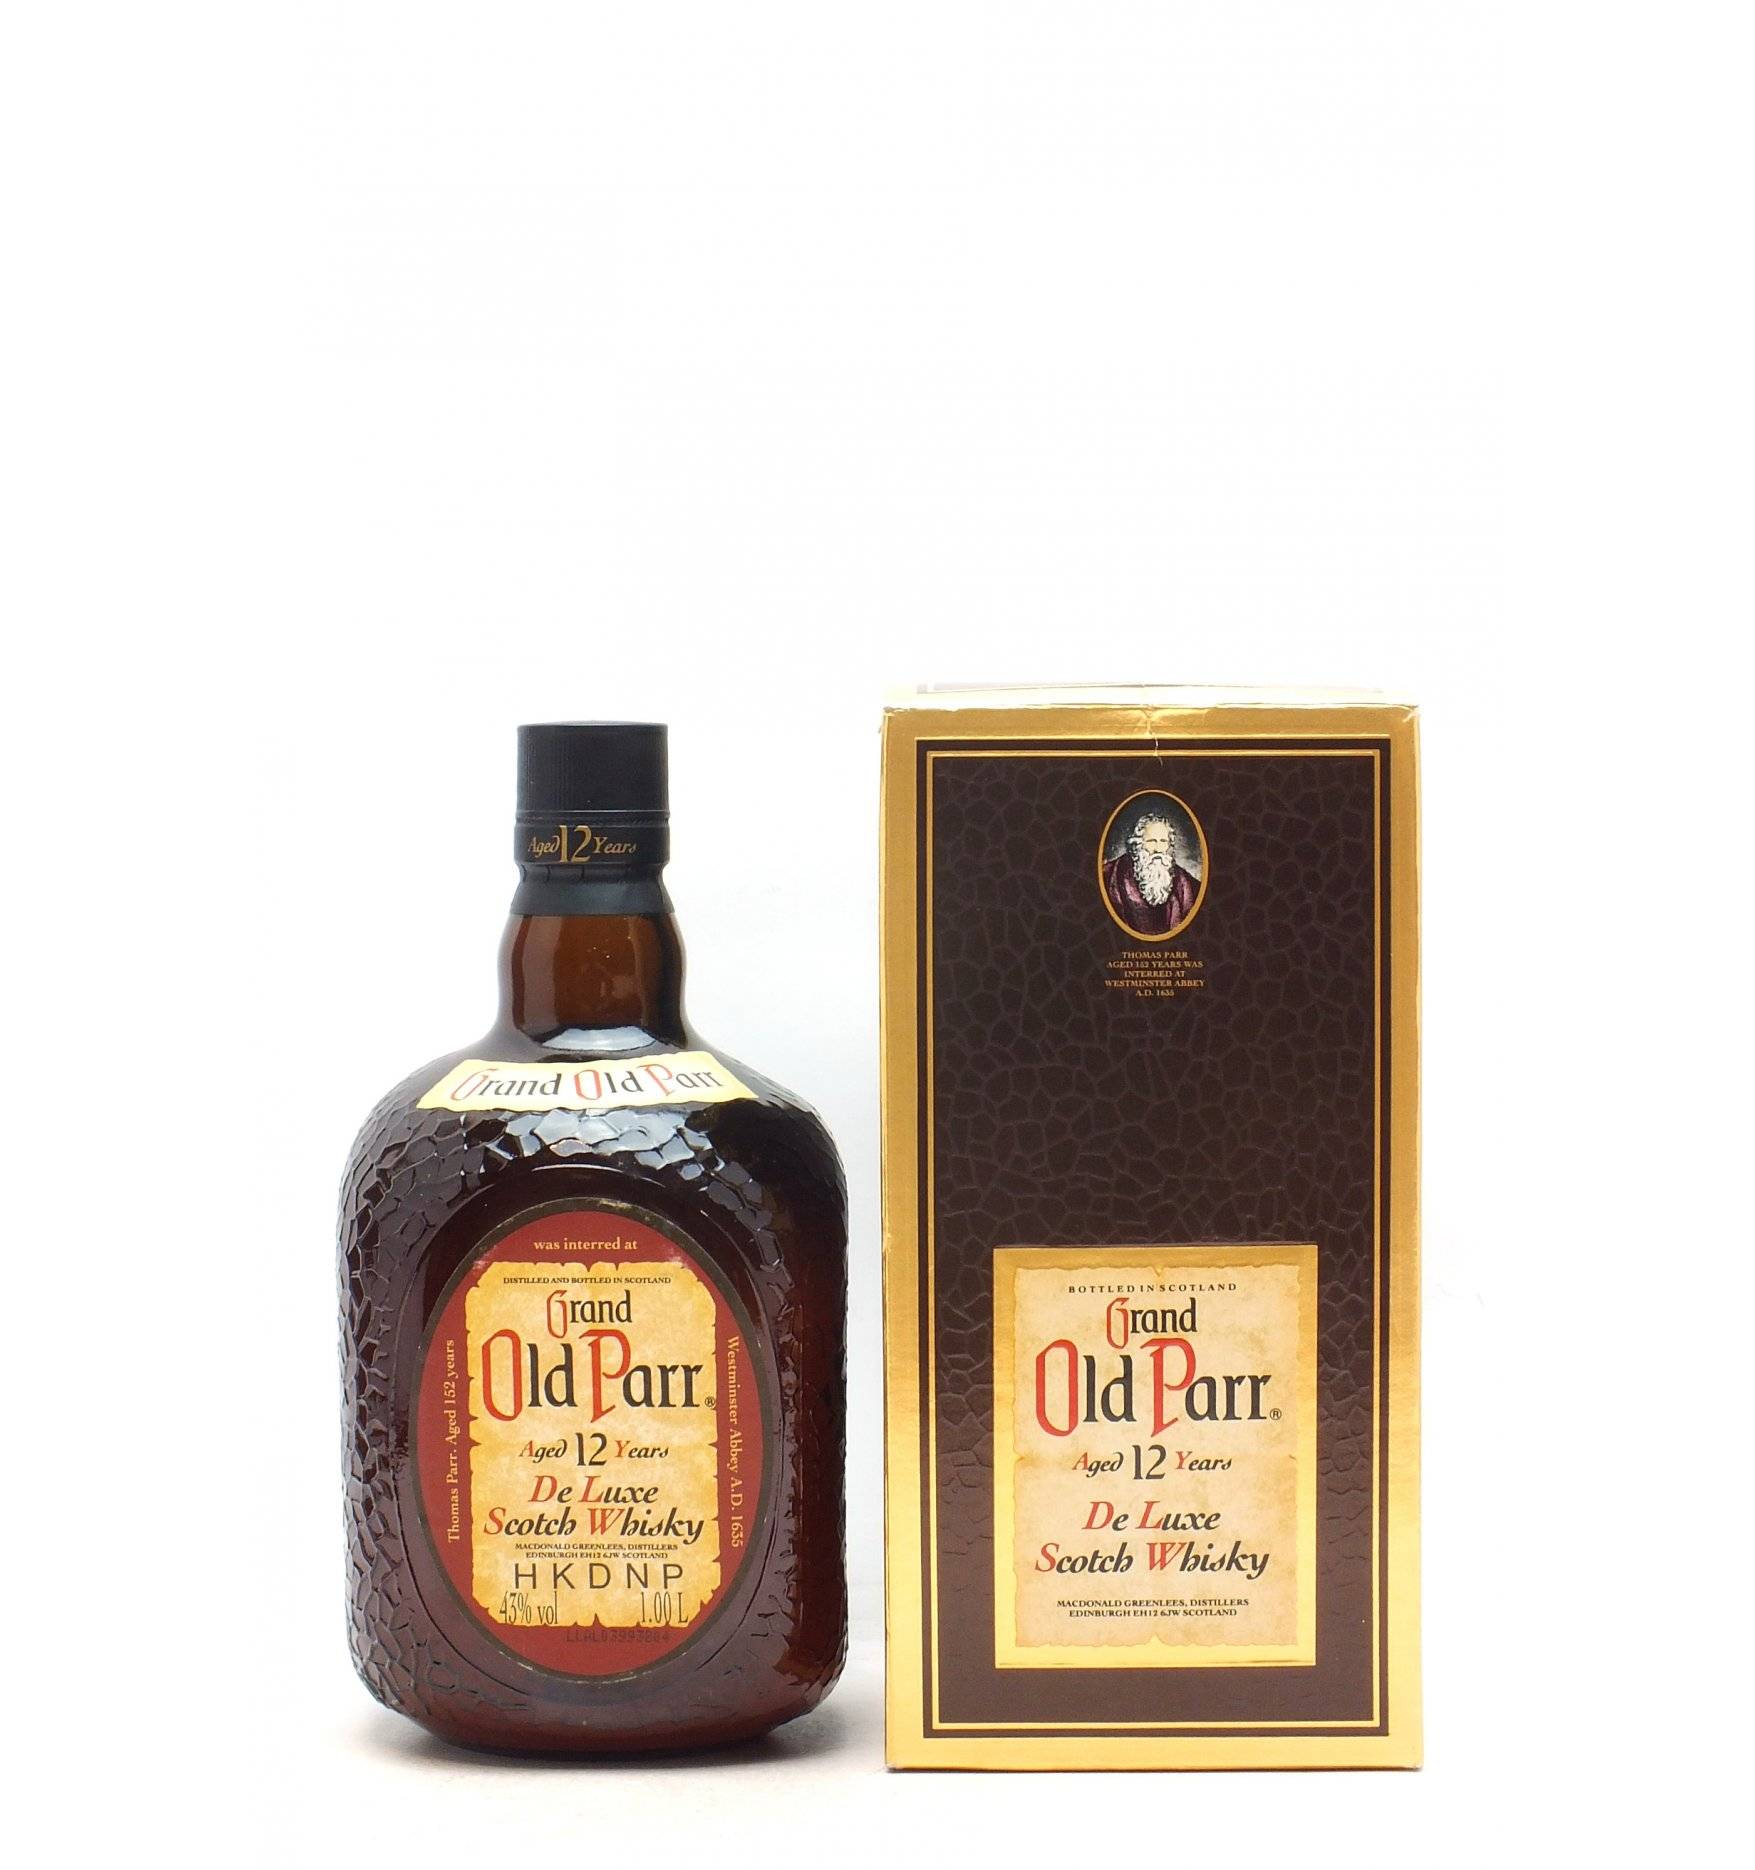 Grand Old Parr 12 Years Old - De Luxe (1 Litre HKDNP) - Just